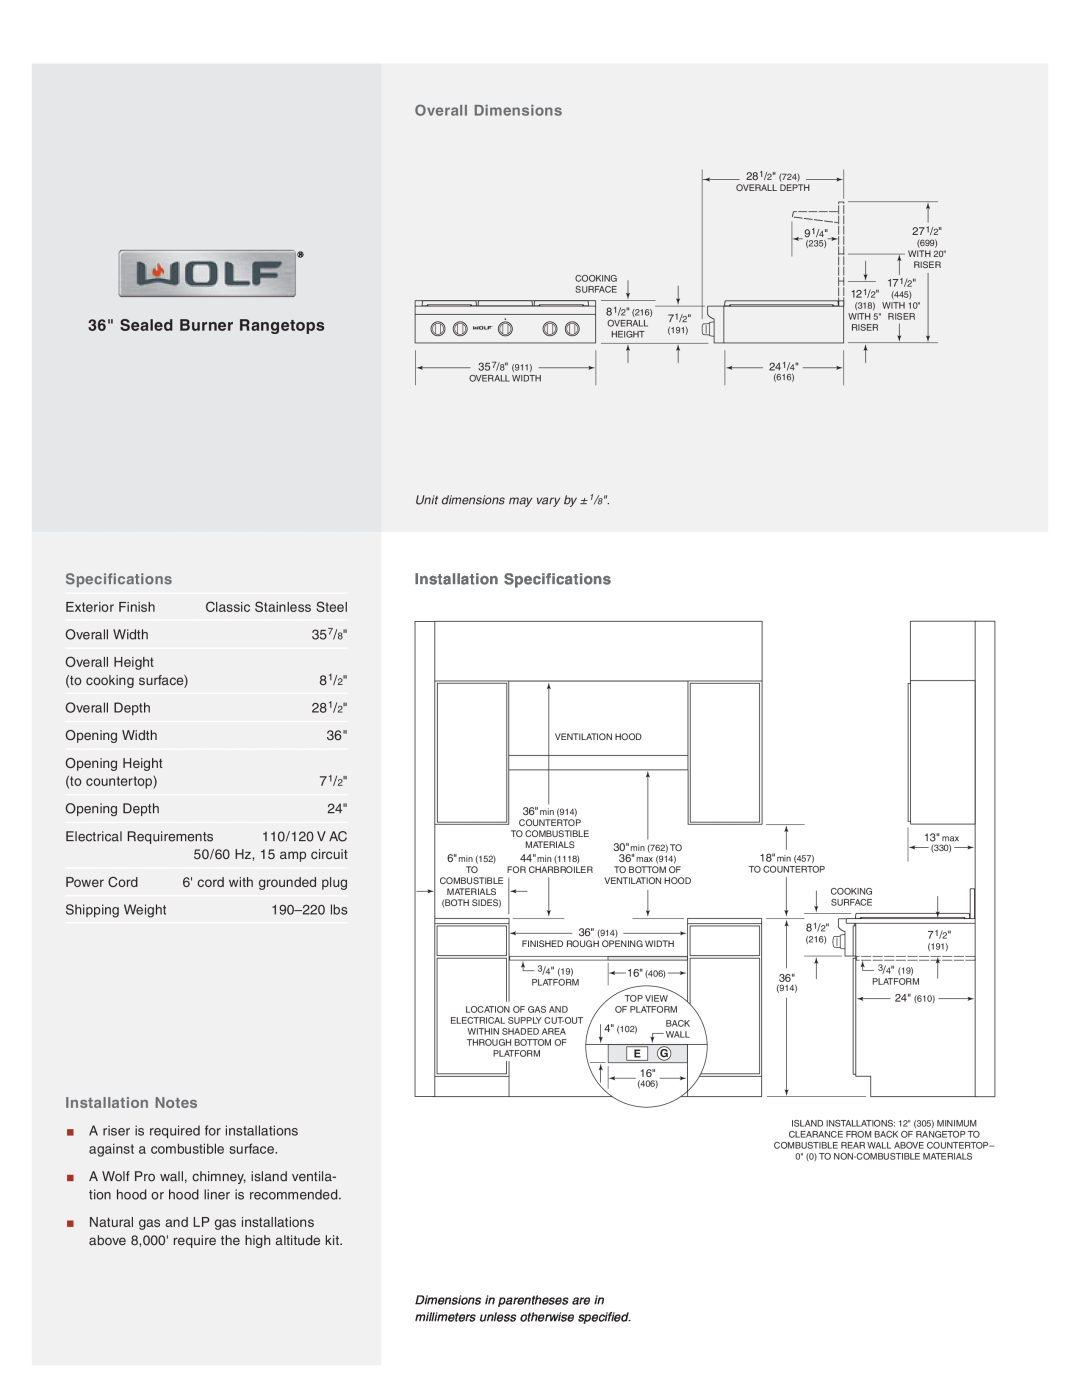 Wolf manual Overall Dimensions, Installation Notes, Installation Specifications, Sealed Burner Rangetops 